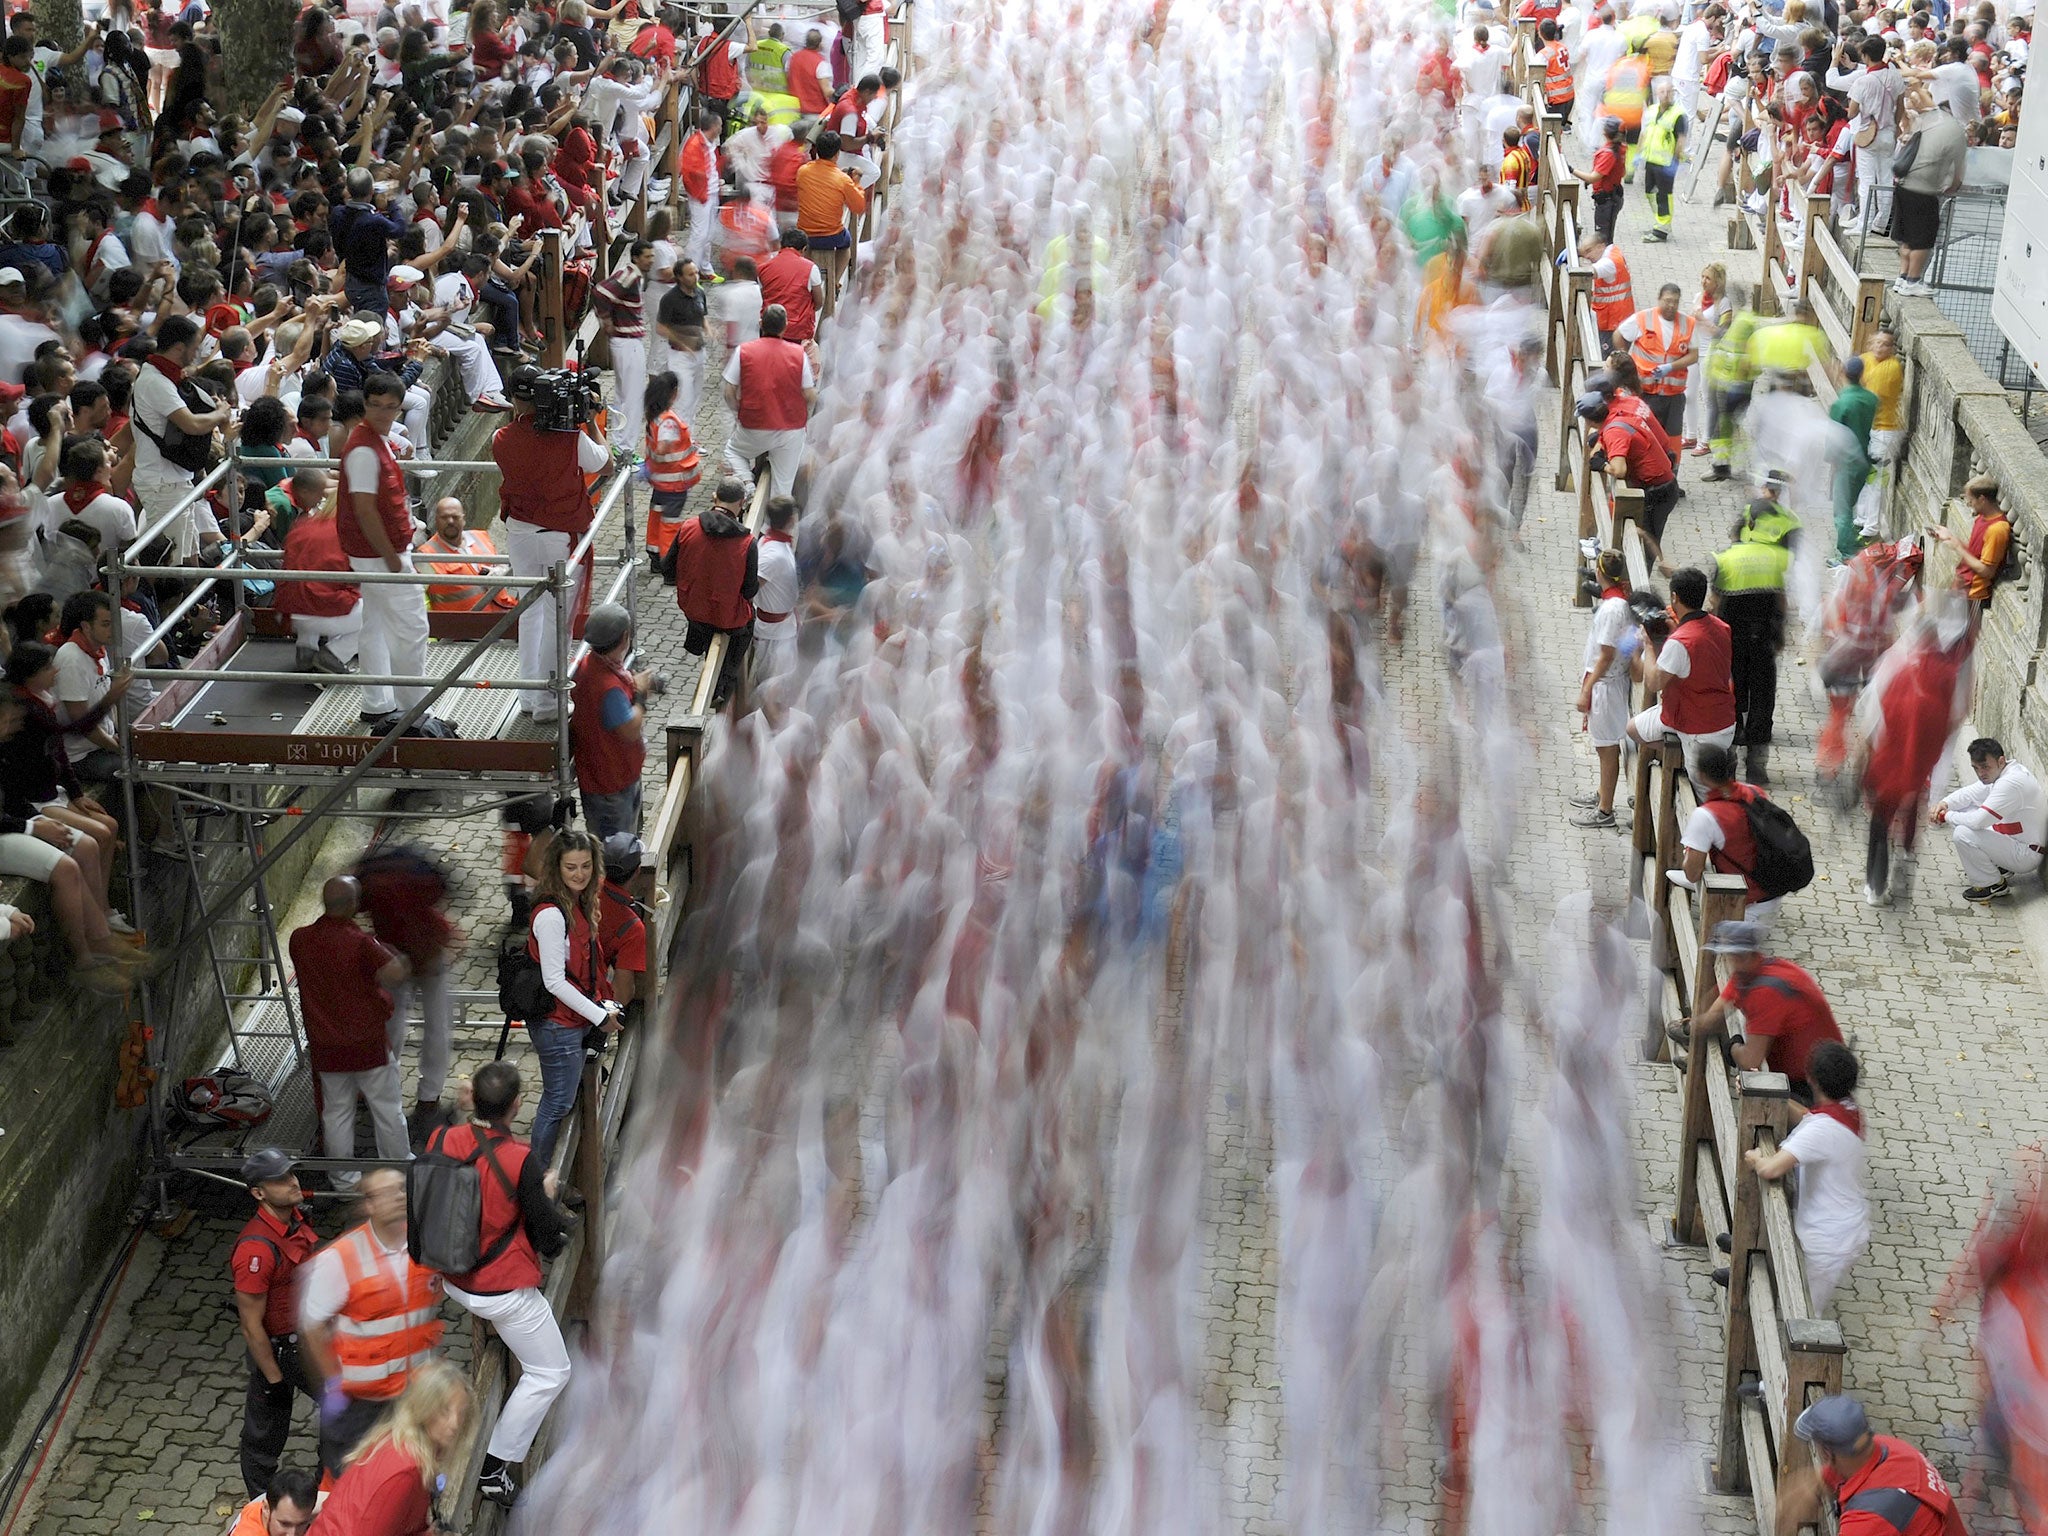 Thousands of runners enter the bullring in Pamplona